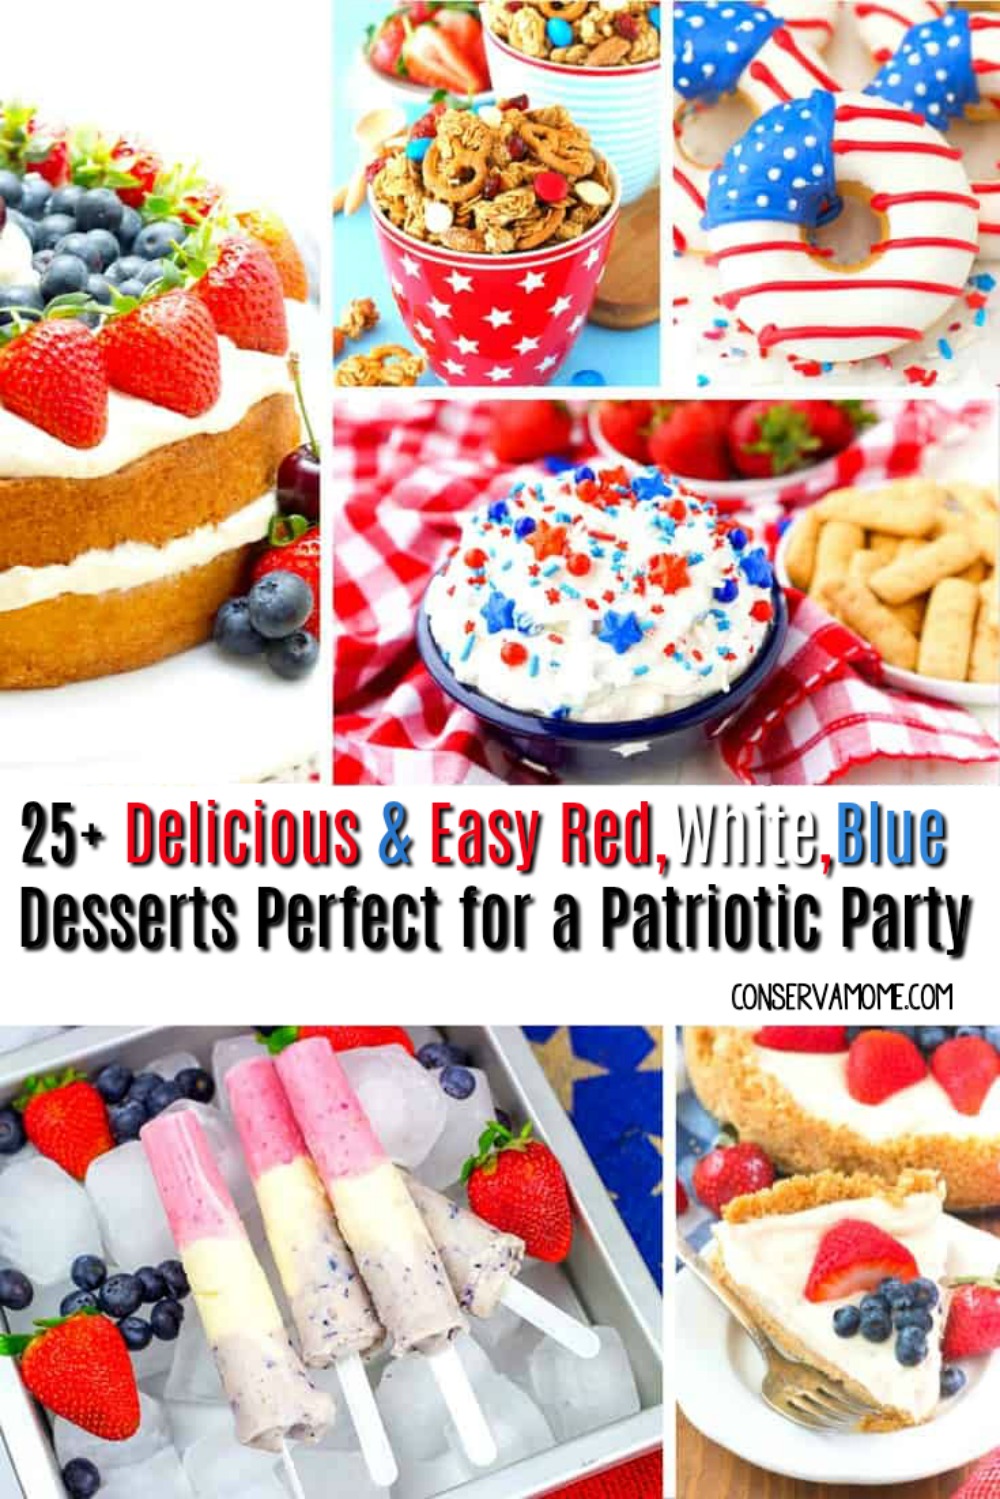 25 Delicious & Easy Red, White & Blue Desserts, Perfect for a Patriotic Party